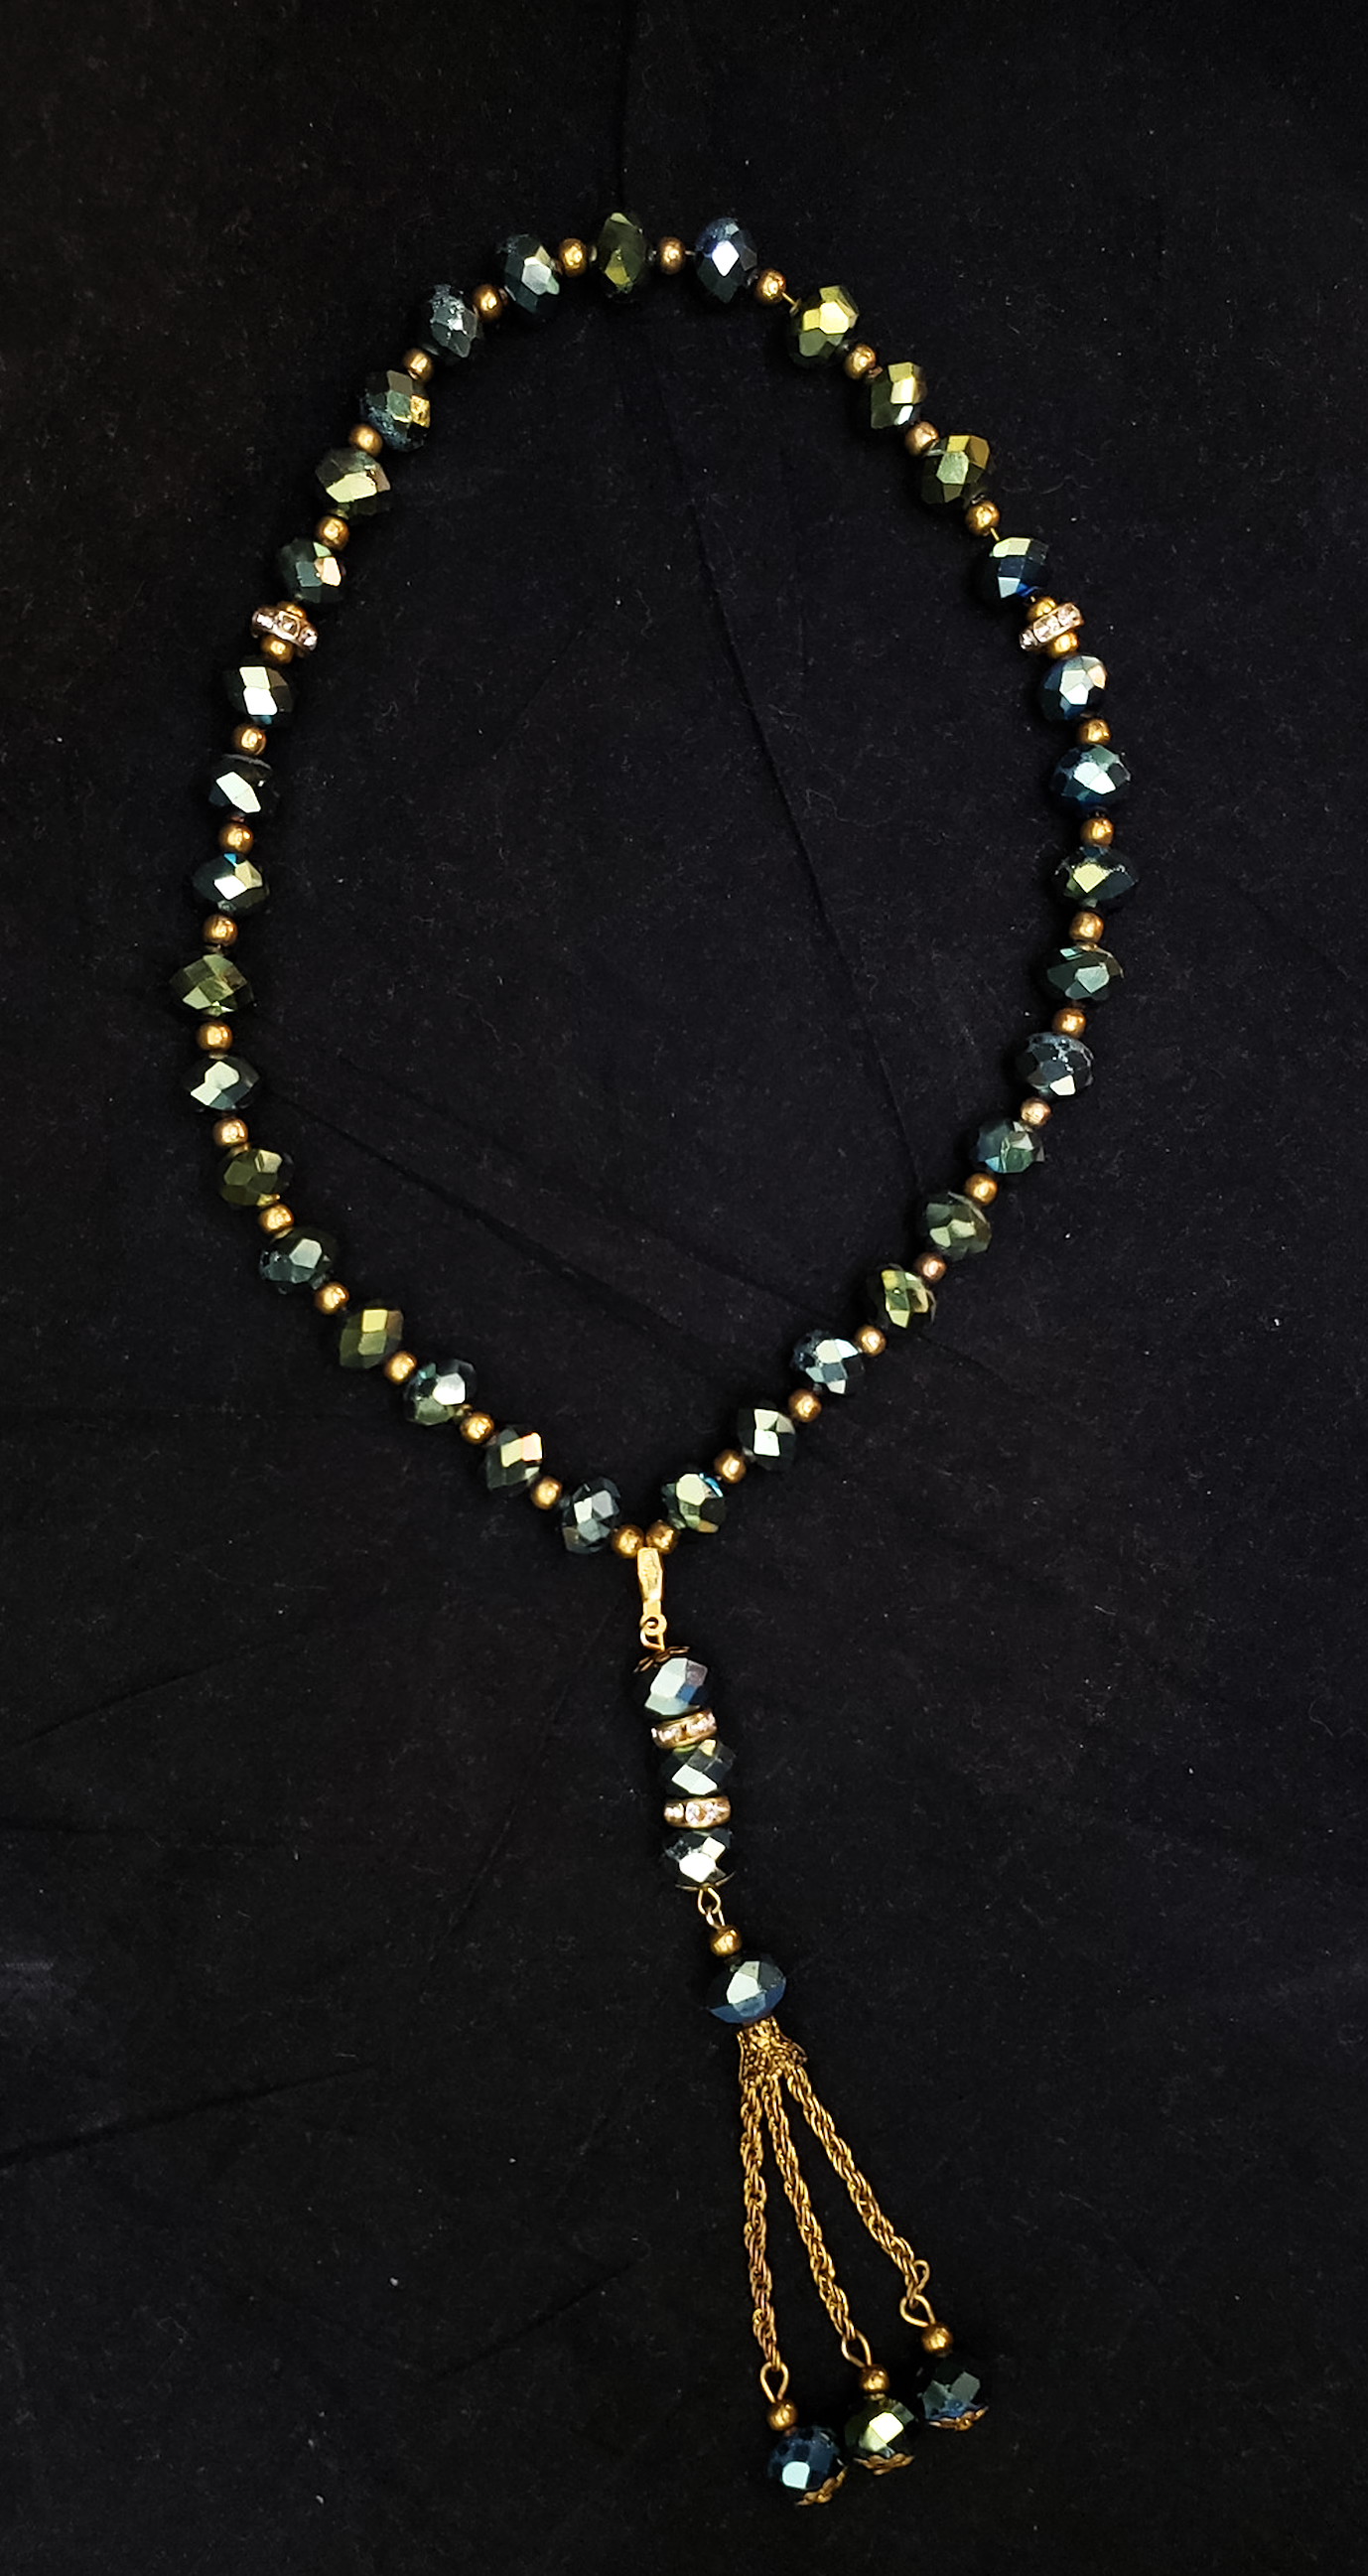 Iridescent faceted beads / necklace - any age? Also where from ...